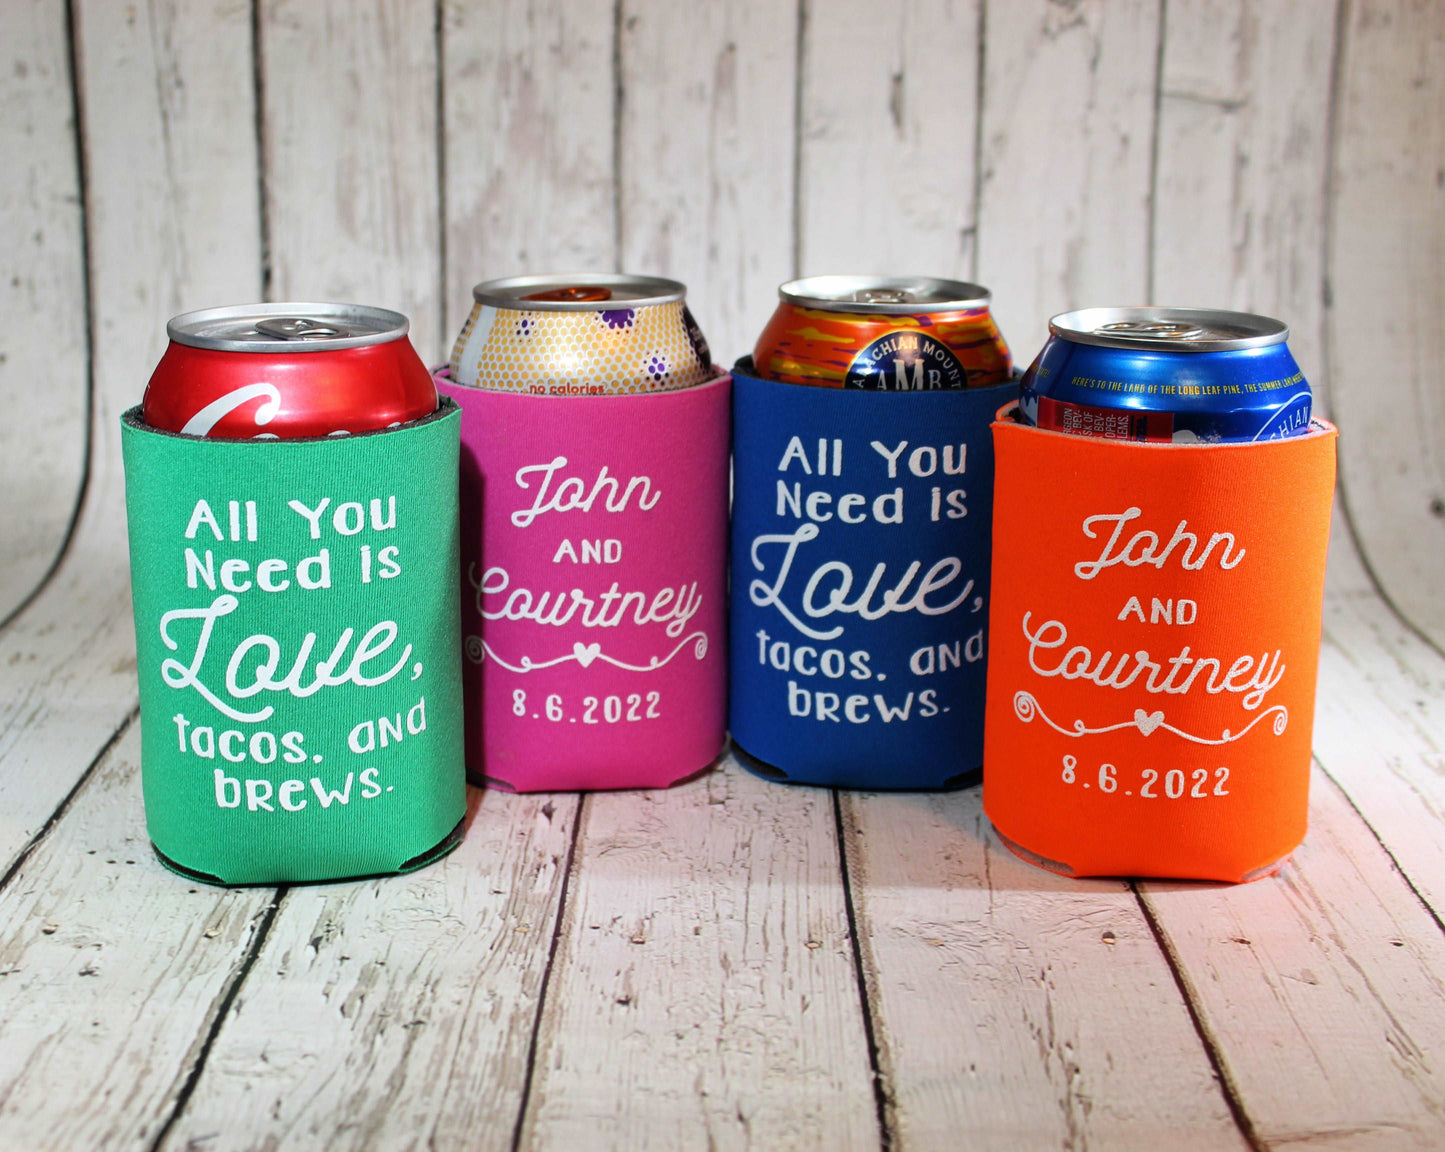 All you need is love, tacos and brews Screen Printed Can Coolers